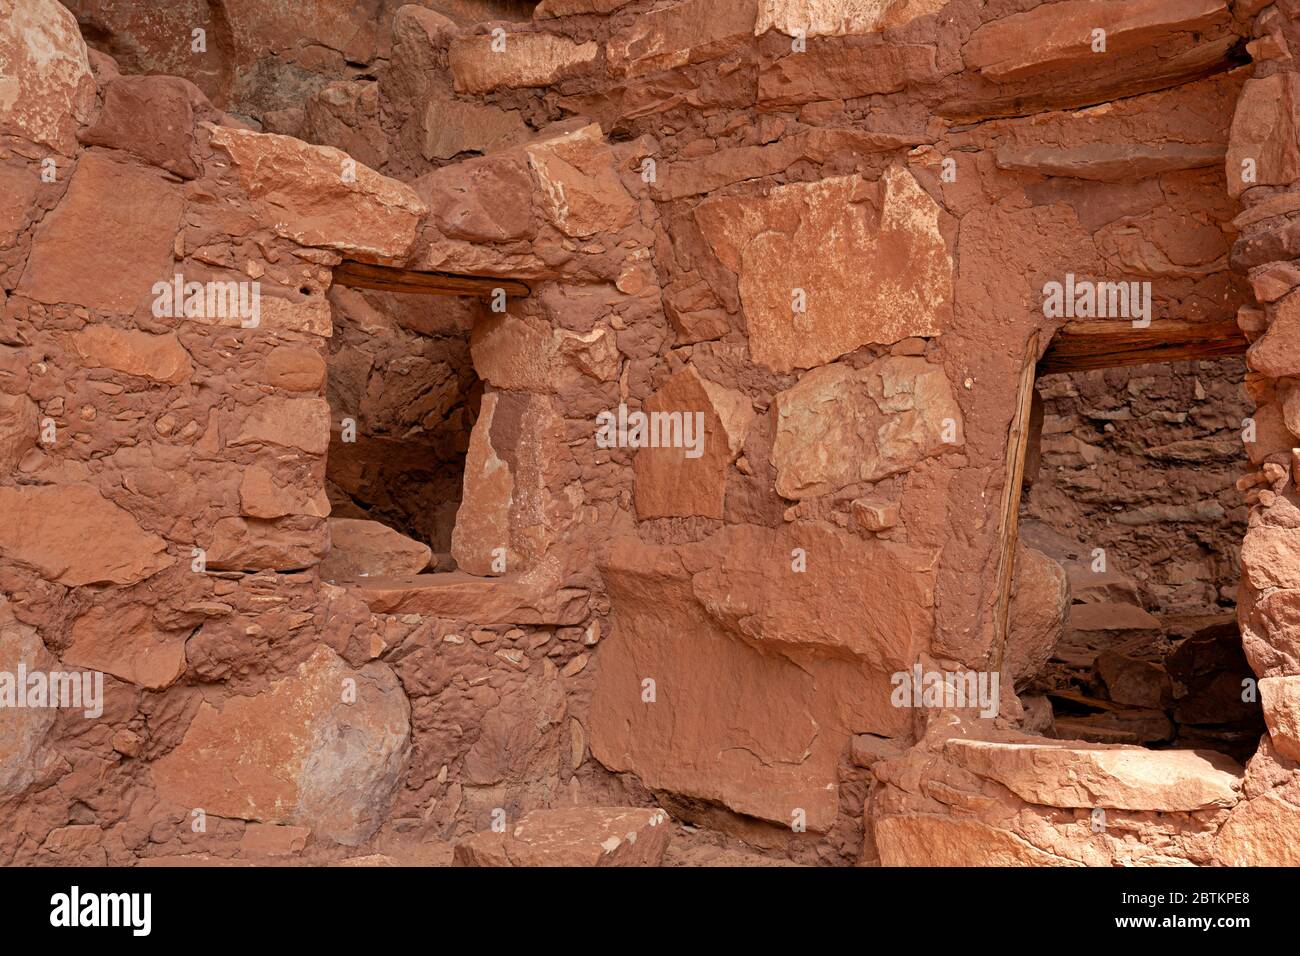 UT00655-00...UTAH - Cliff dwelling built by the Ancestral Puebloans in a deep cove, part of the Horsecollar Ruin in Natural Bridges National Monument. Stock Photo